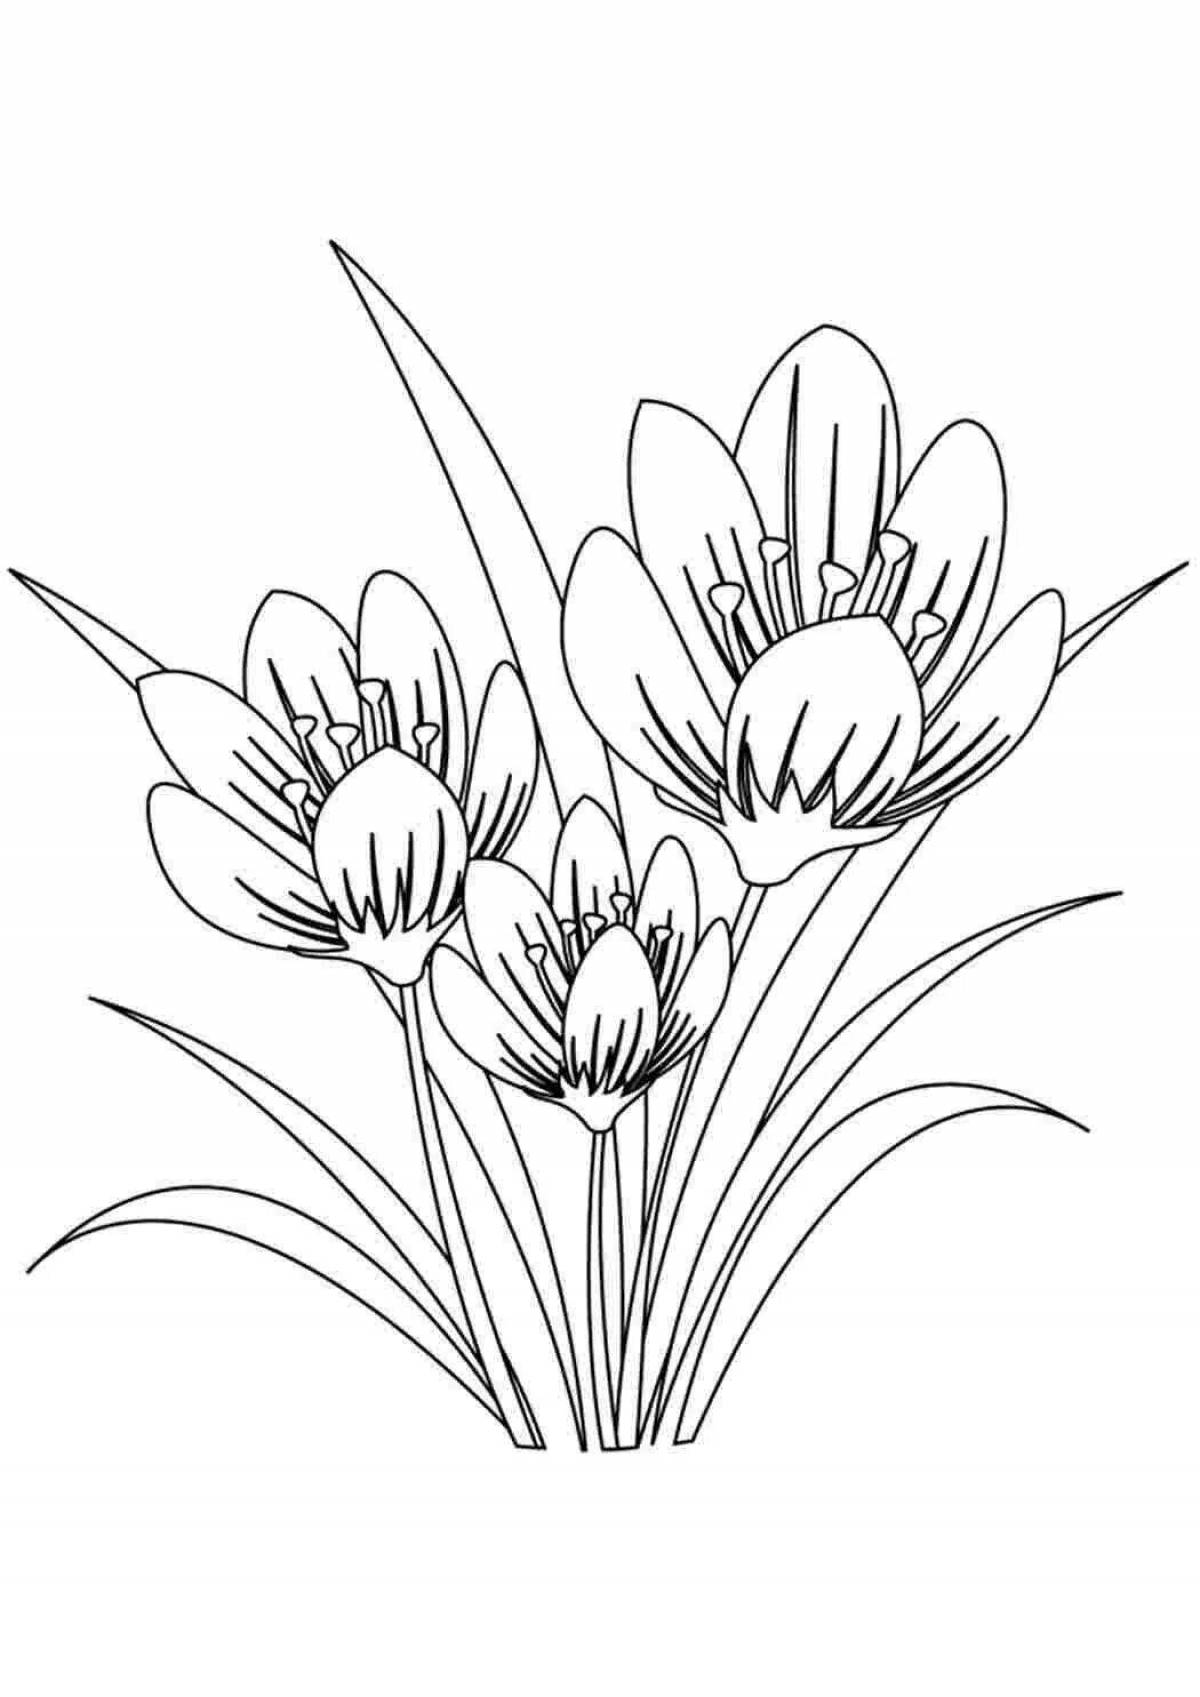 Exquisite grass coloring page